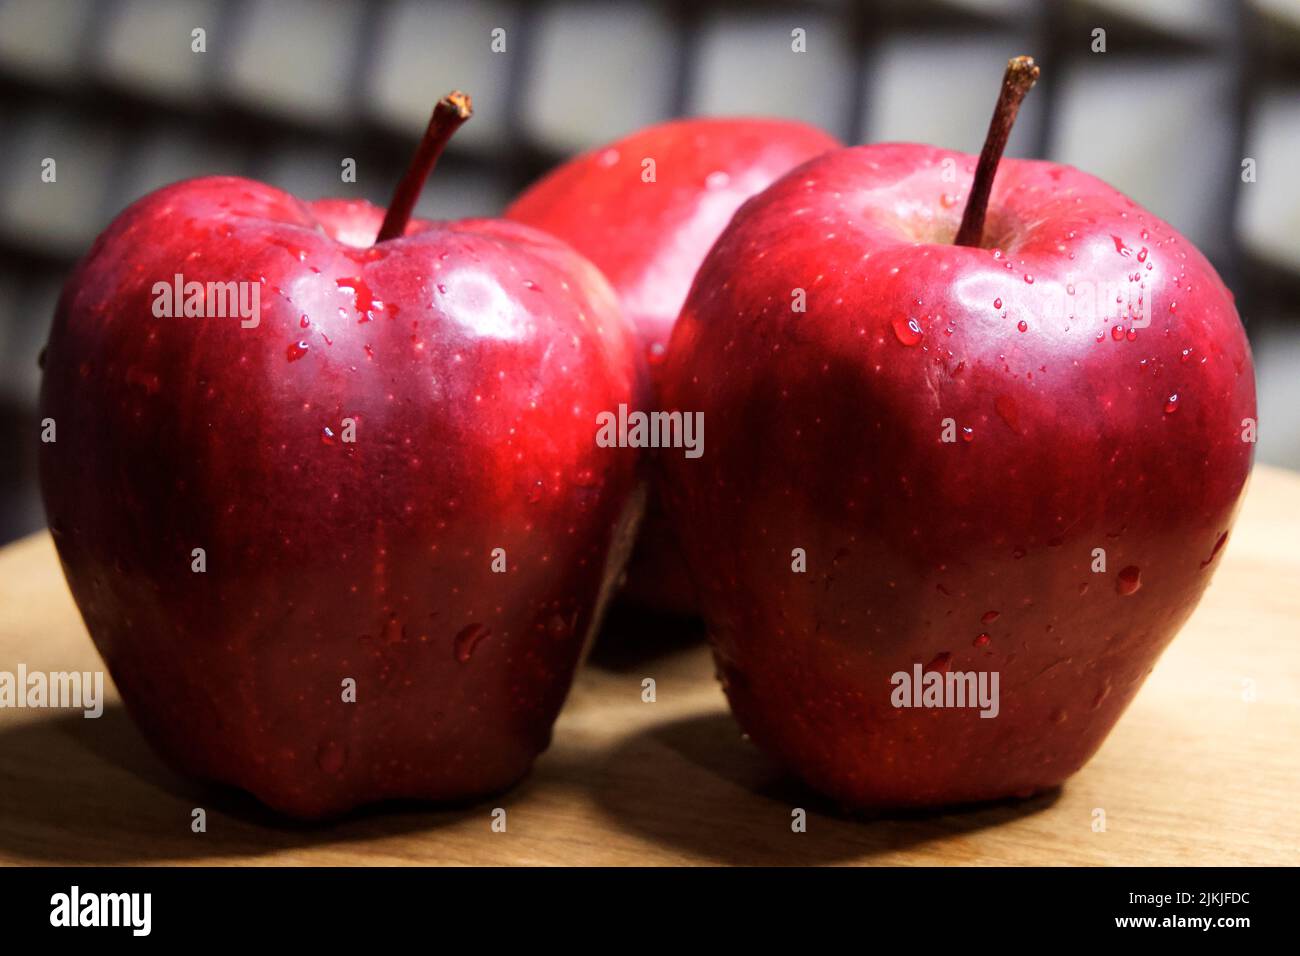 Three large red apples of the Red Chief variety. Water droplets on fruit. Stock Photo